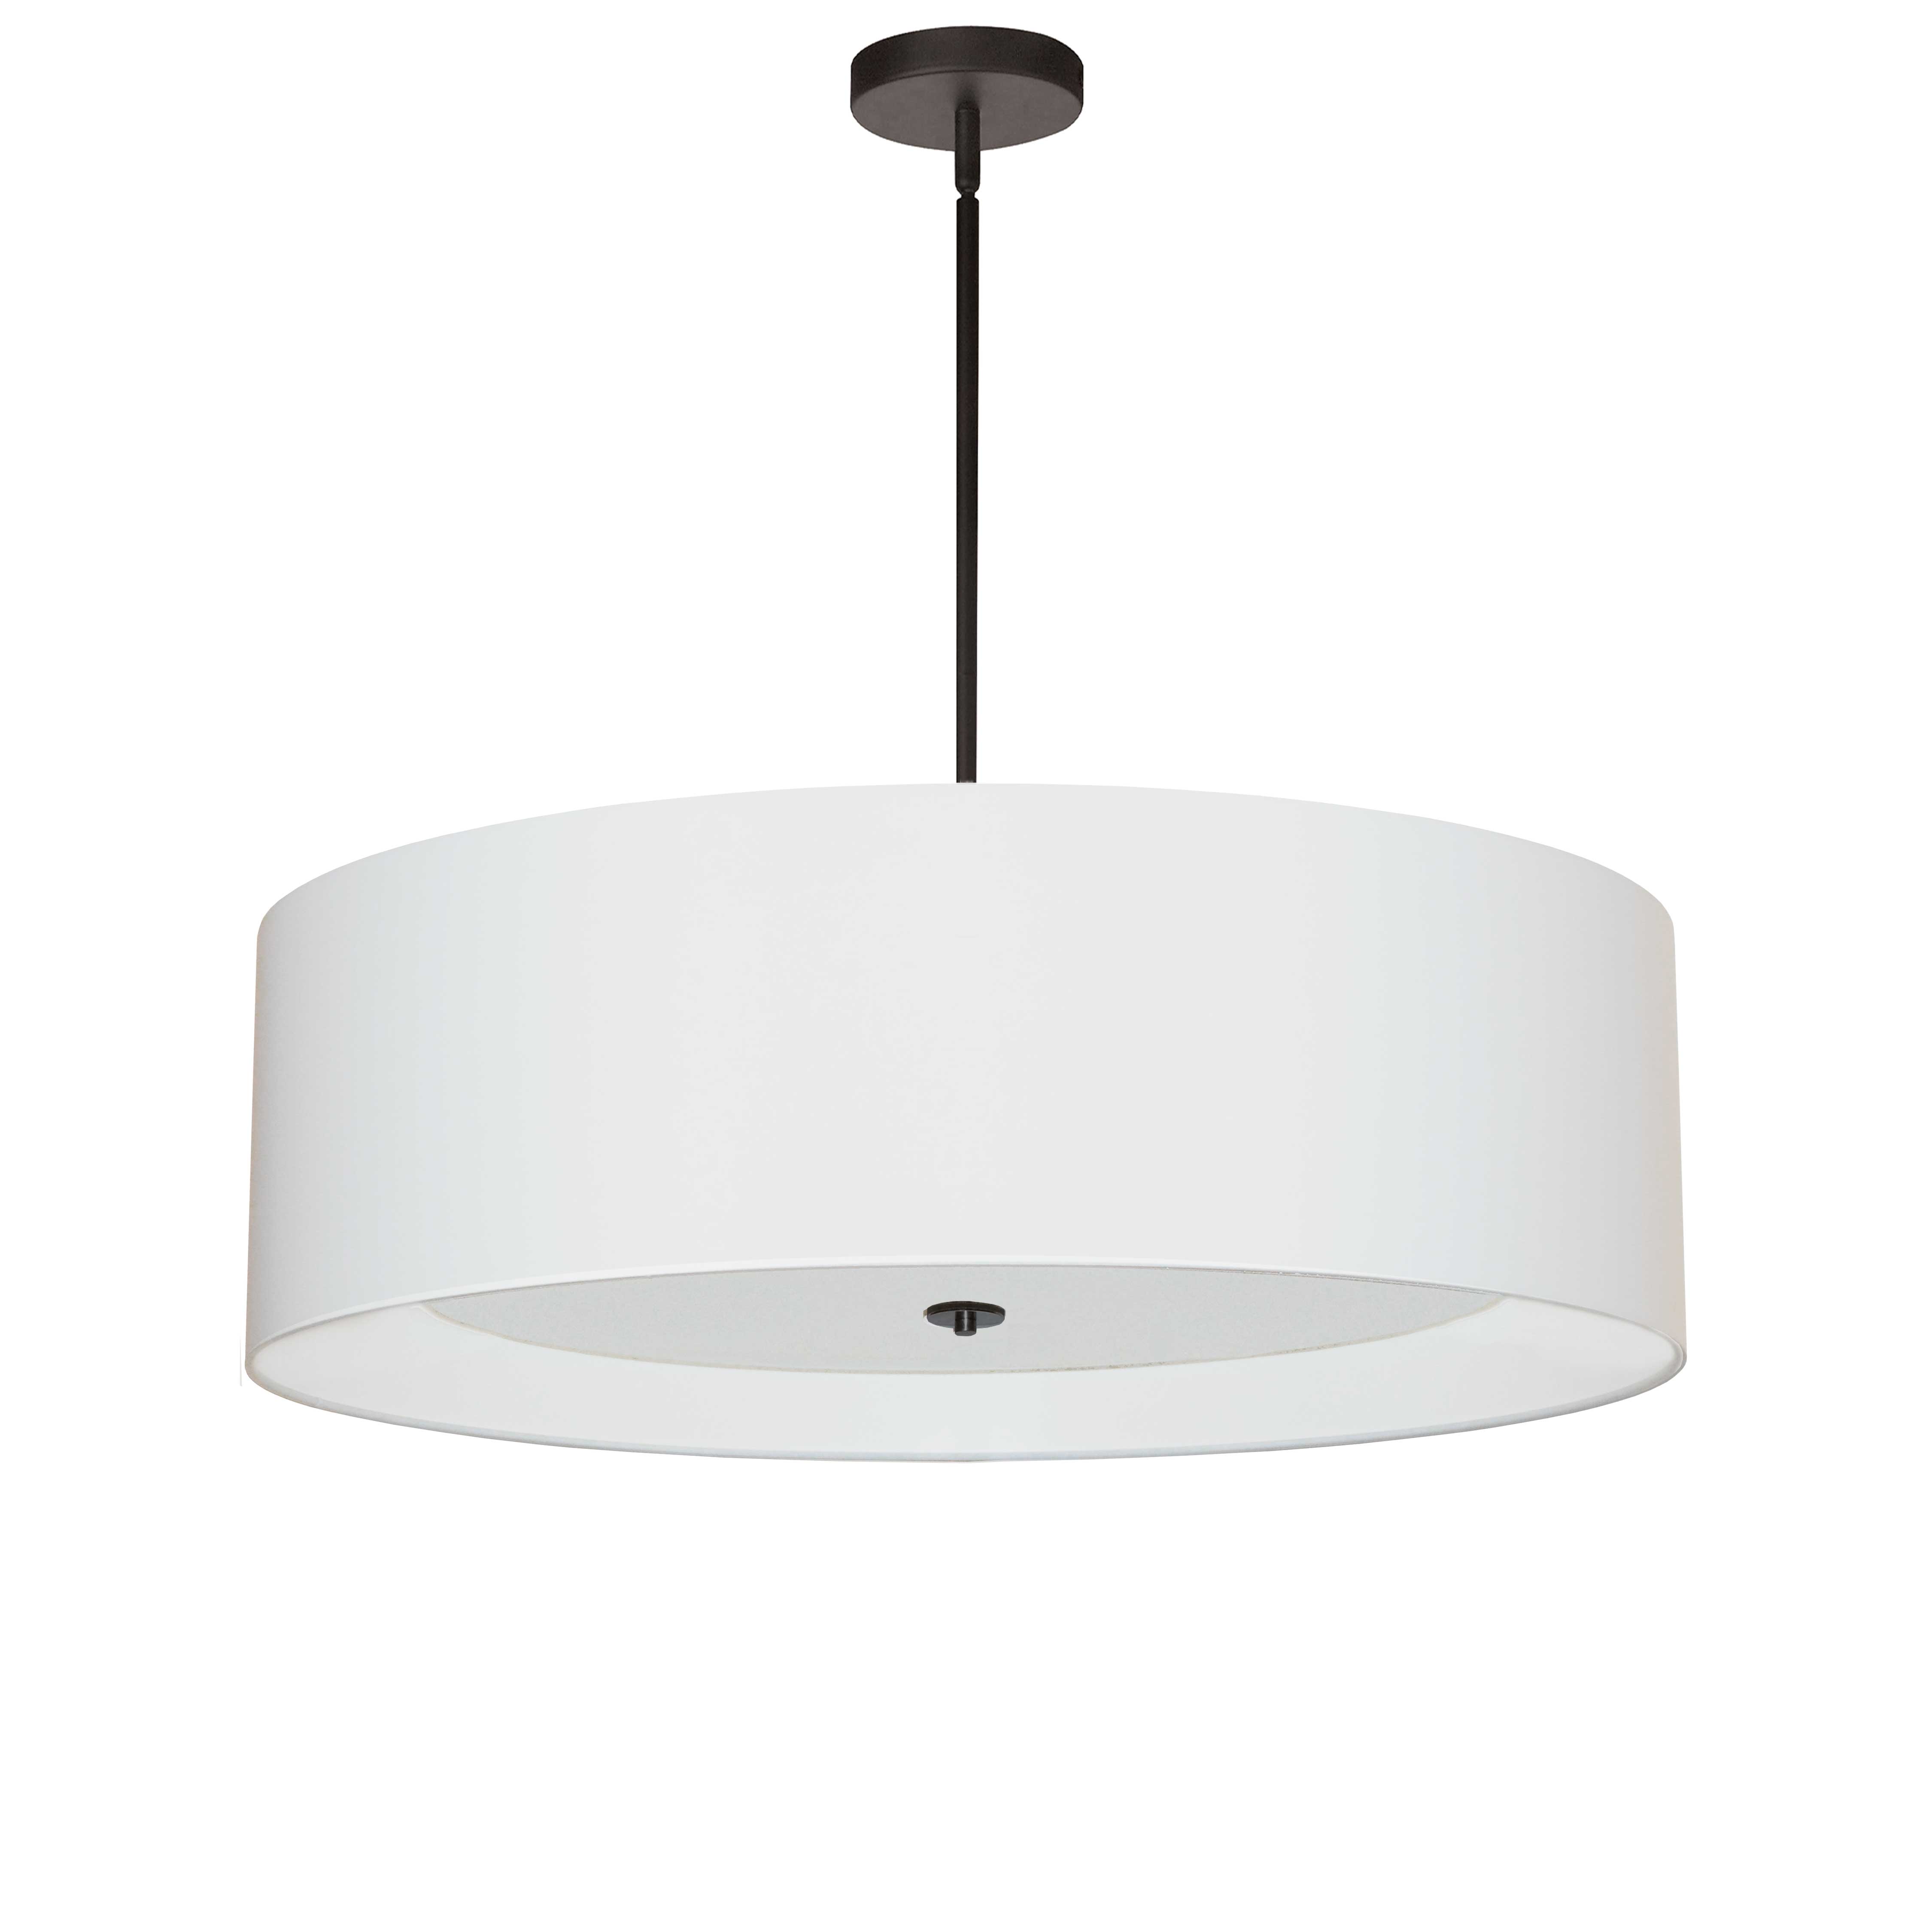 4LT Incan Pendant, MB, WH Shade w/ WH Diffuser